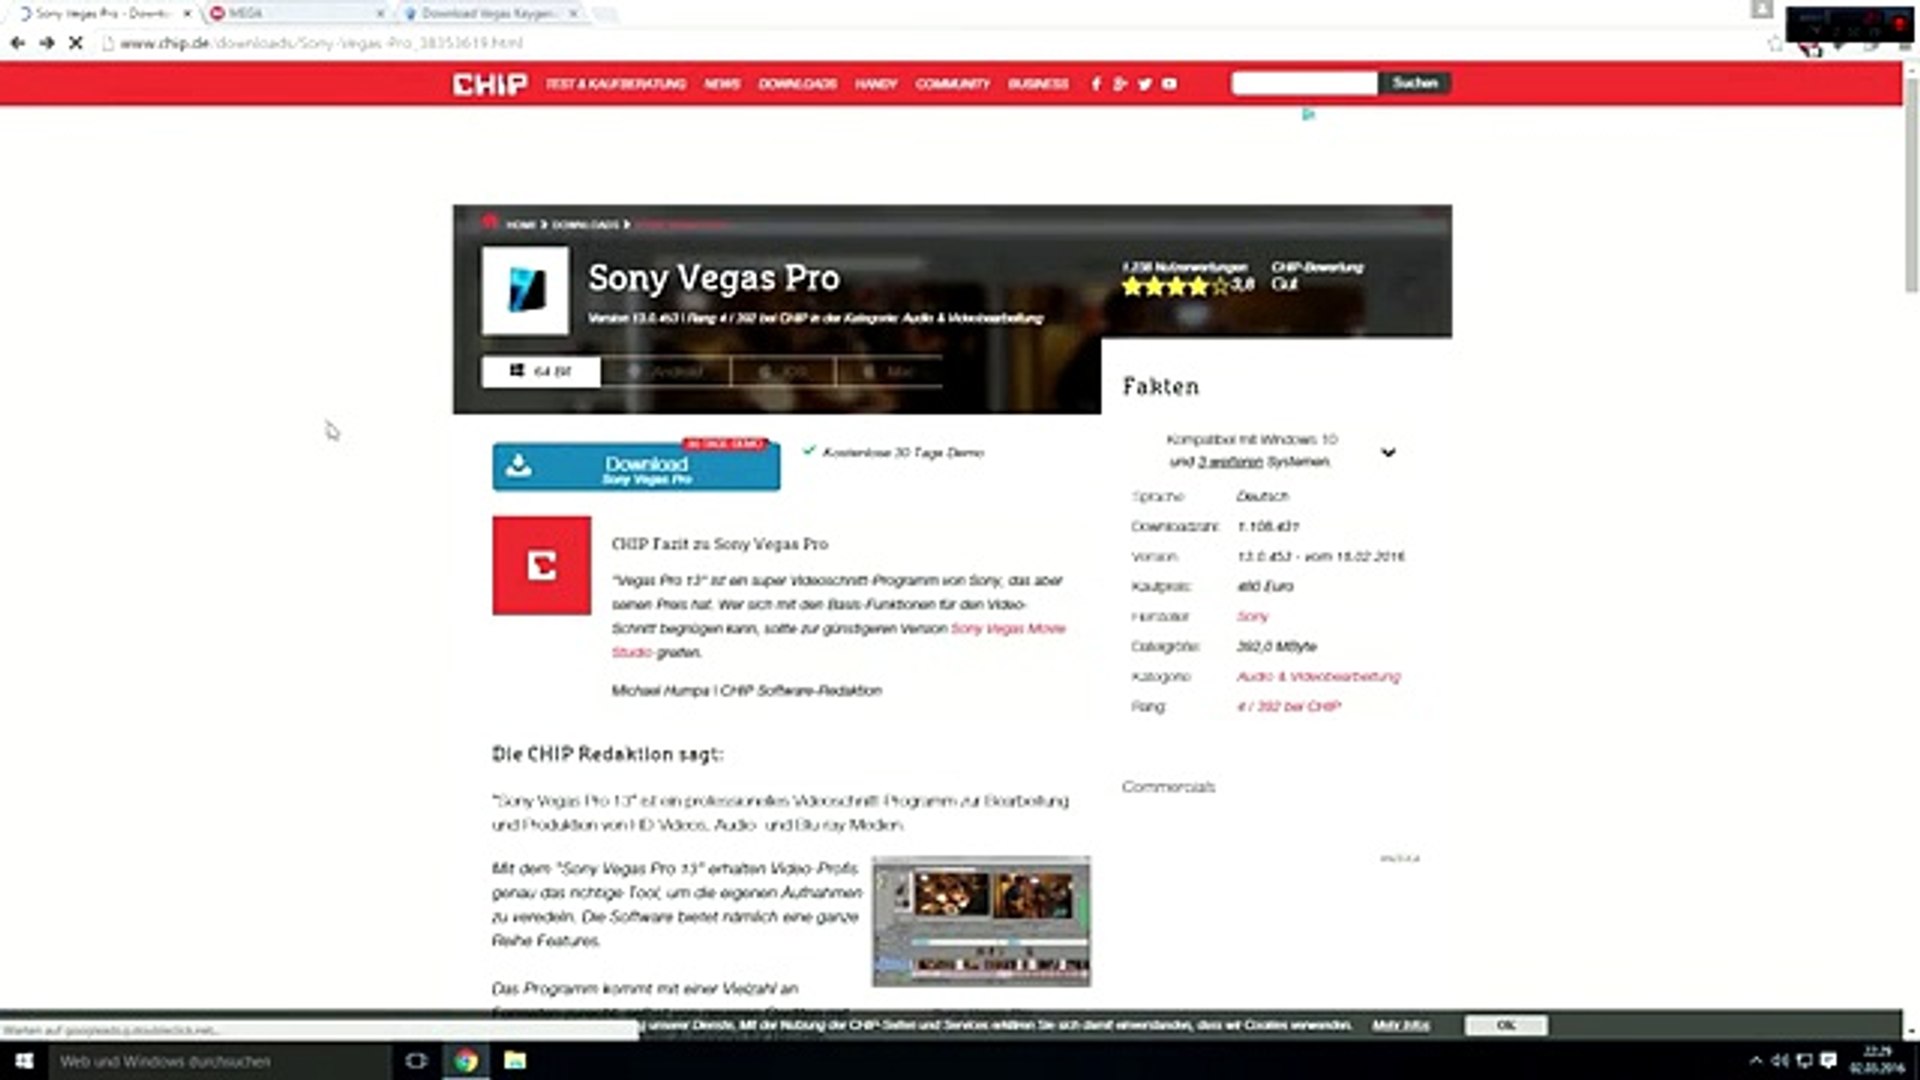 Sony Vegas Pro 13 Crack 64 Bit English Subbed Free Download Video Dailymotion